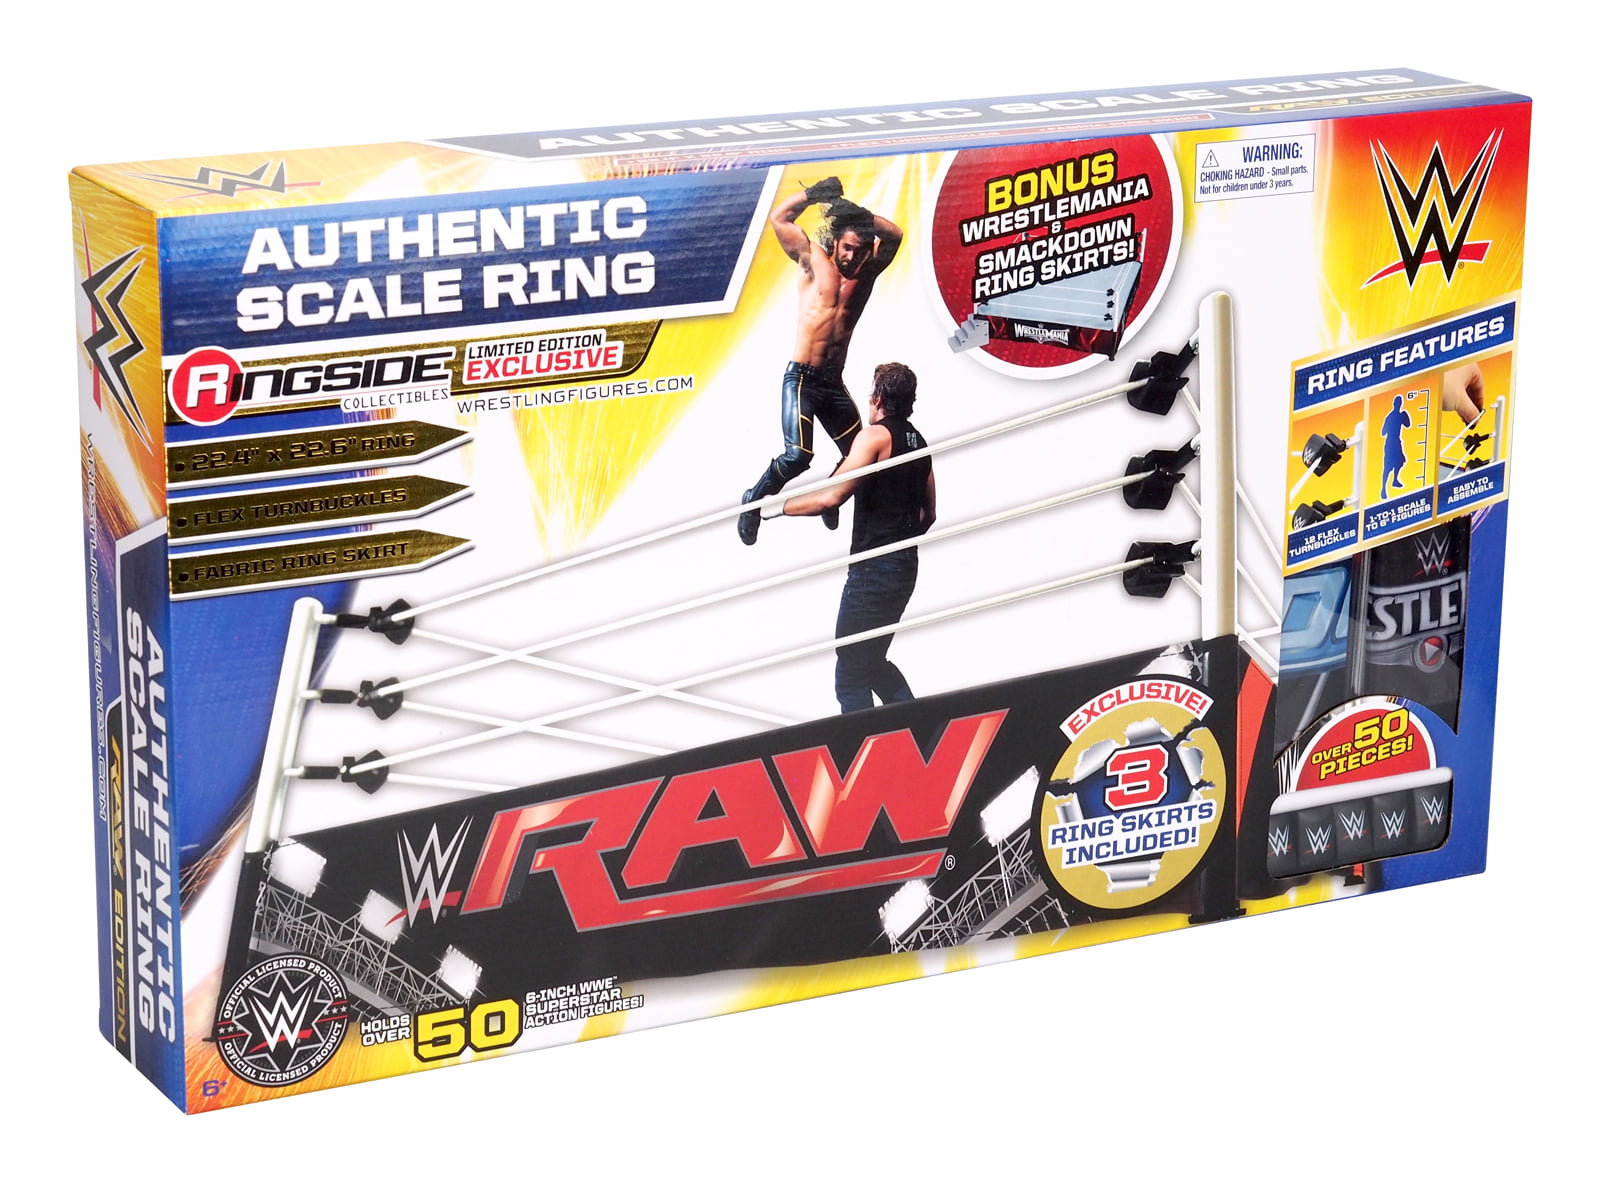 Wwe Authentic Scale Wrestling Ring W 3 Ring Skirts Exclusive Wwe Toy Wrestling Action Figure Accessories Walmart Com